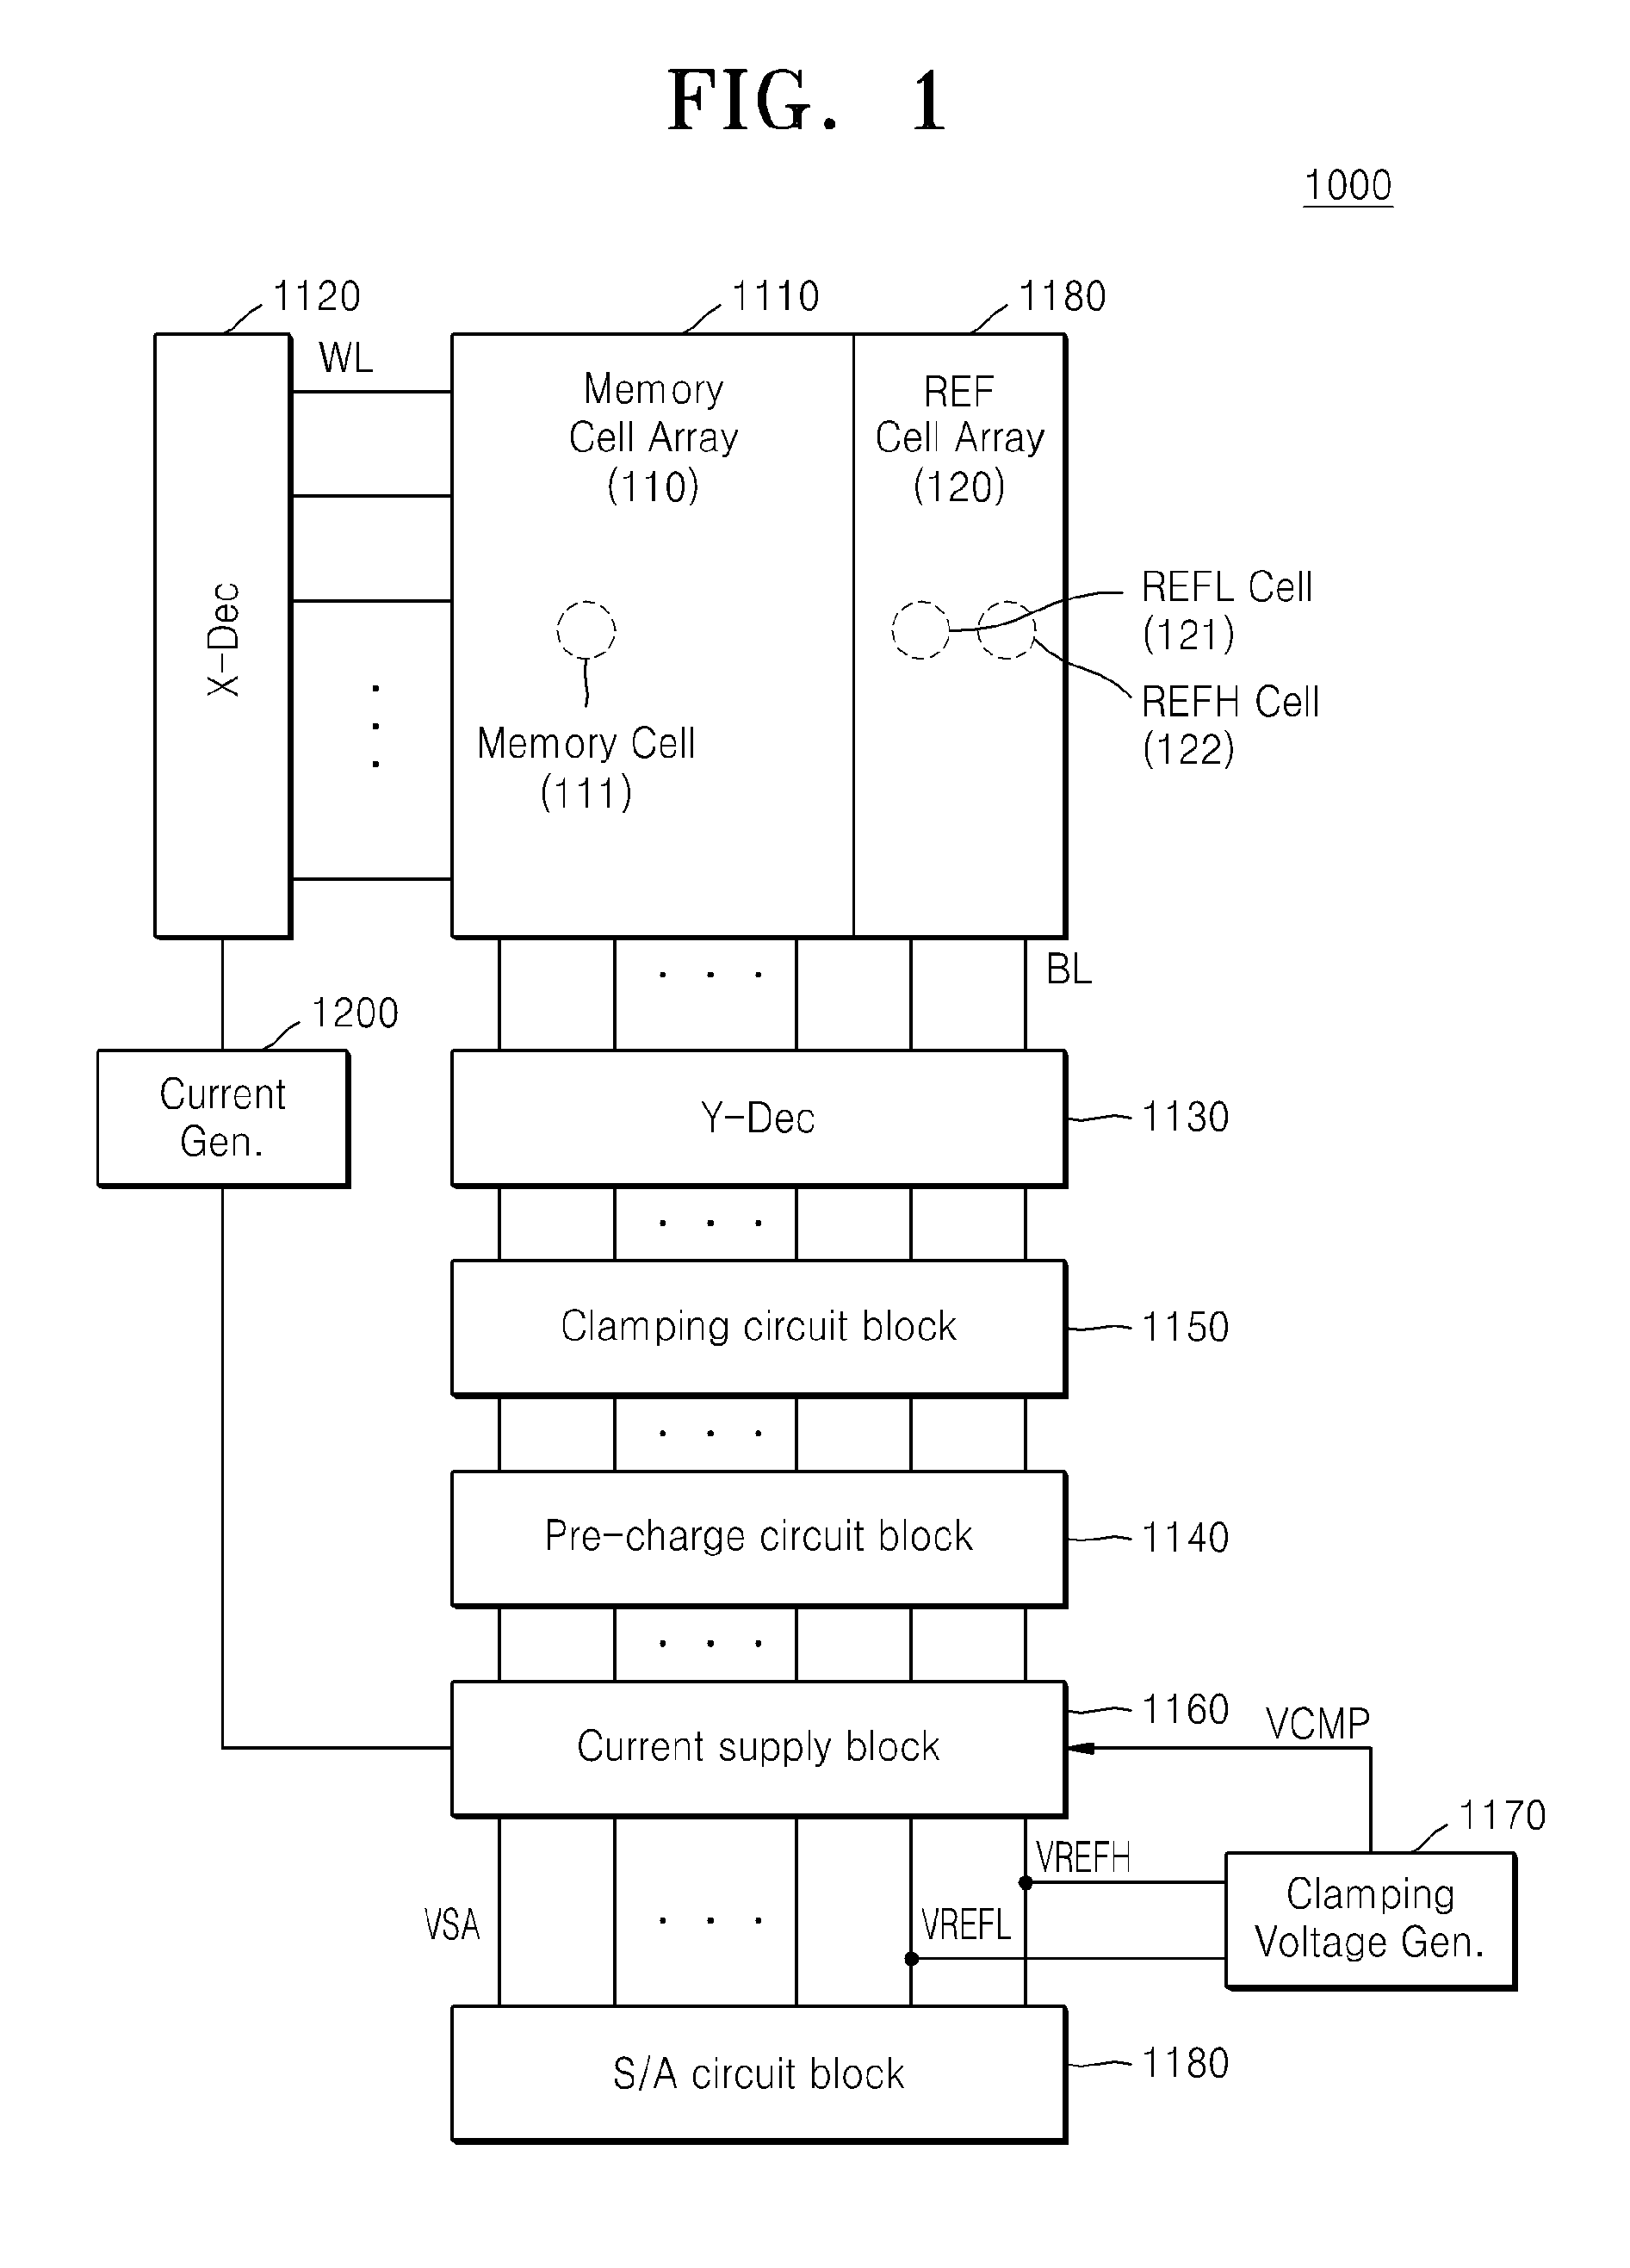 Nonvolatile memory device with a clamping voltage generation circuit for compensating the variations in memory cell parameters